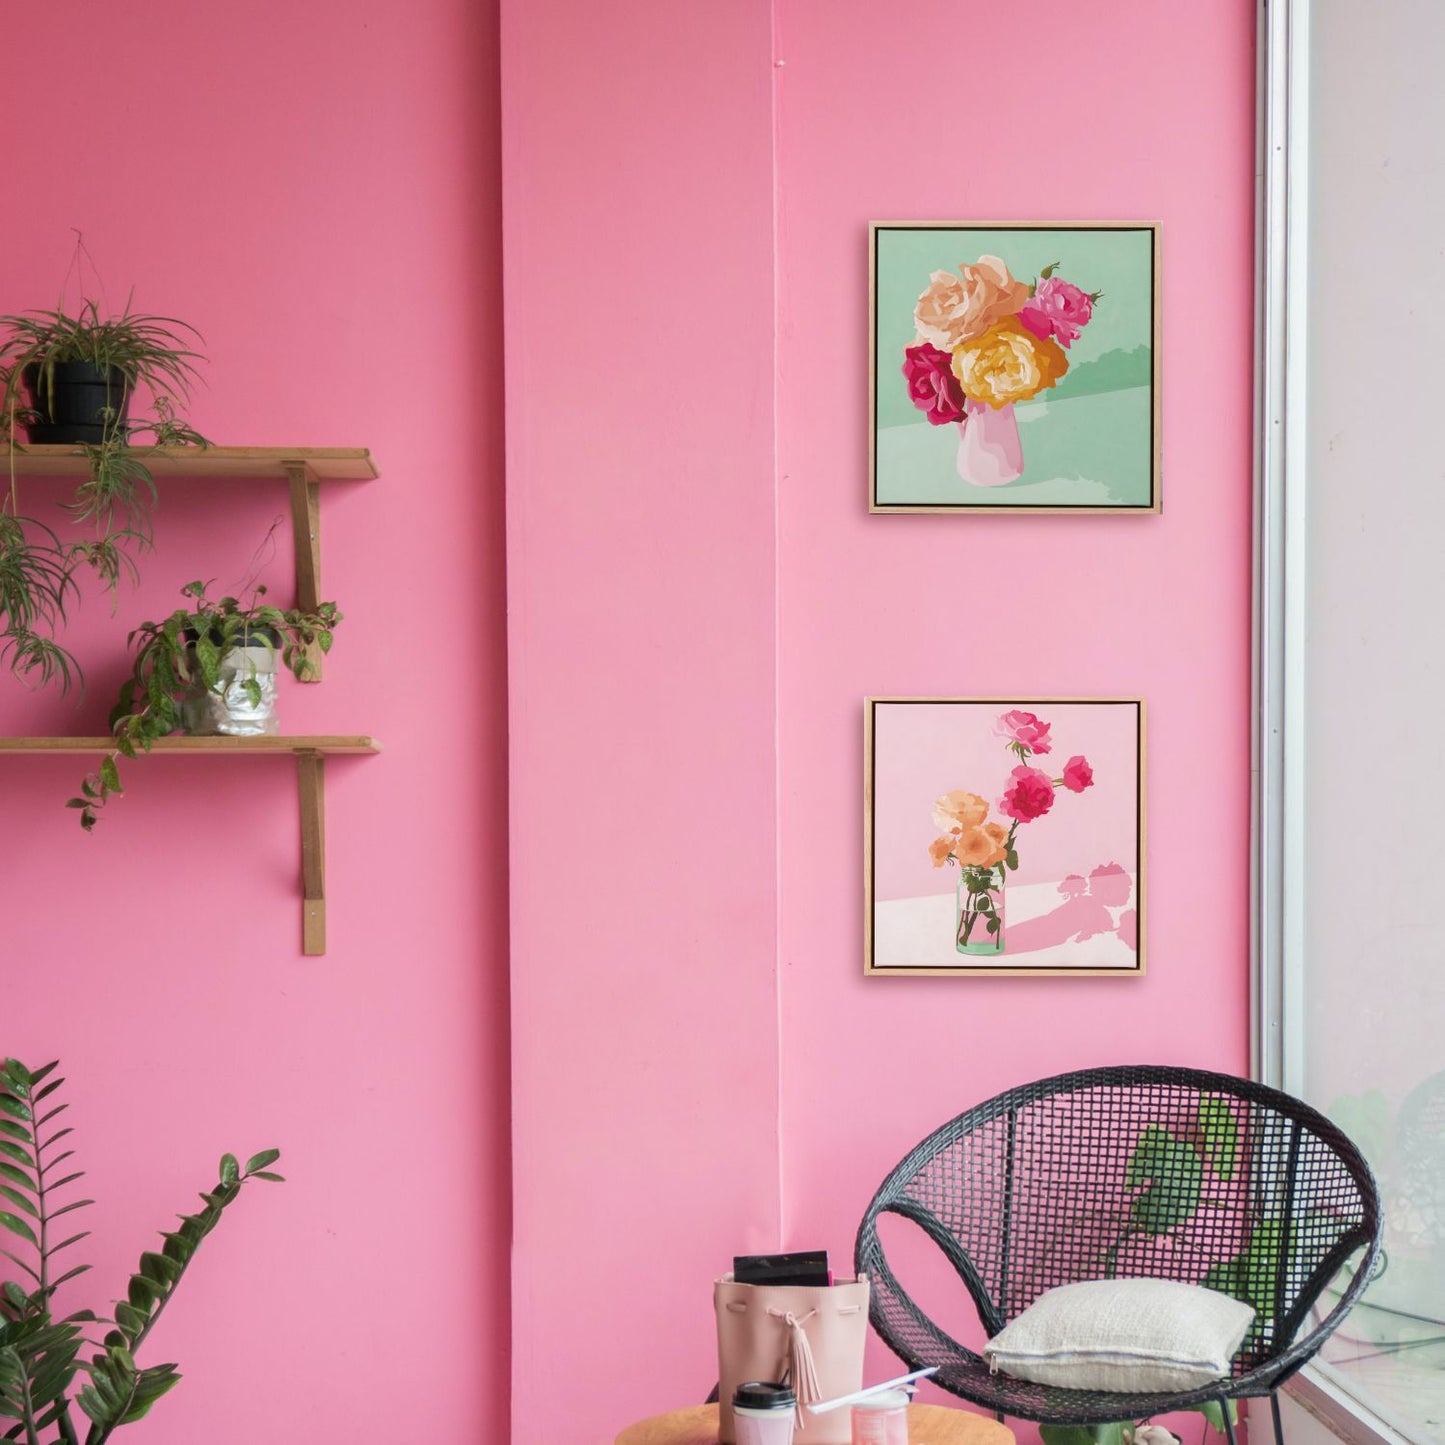 Lifestyle photo of original oil paintings hanging on a pink wall surrounded by plants and a chair next to a window